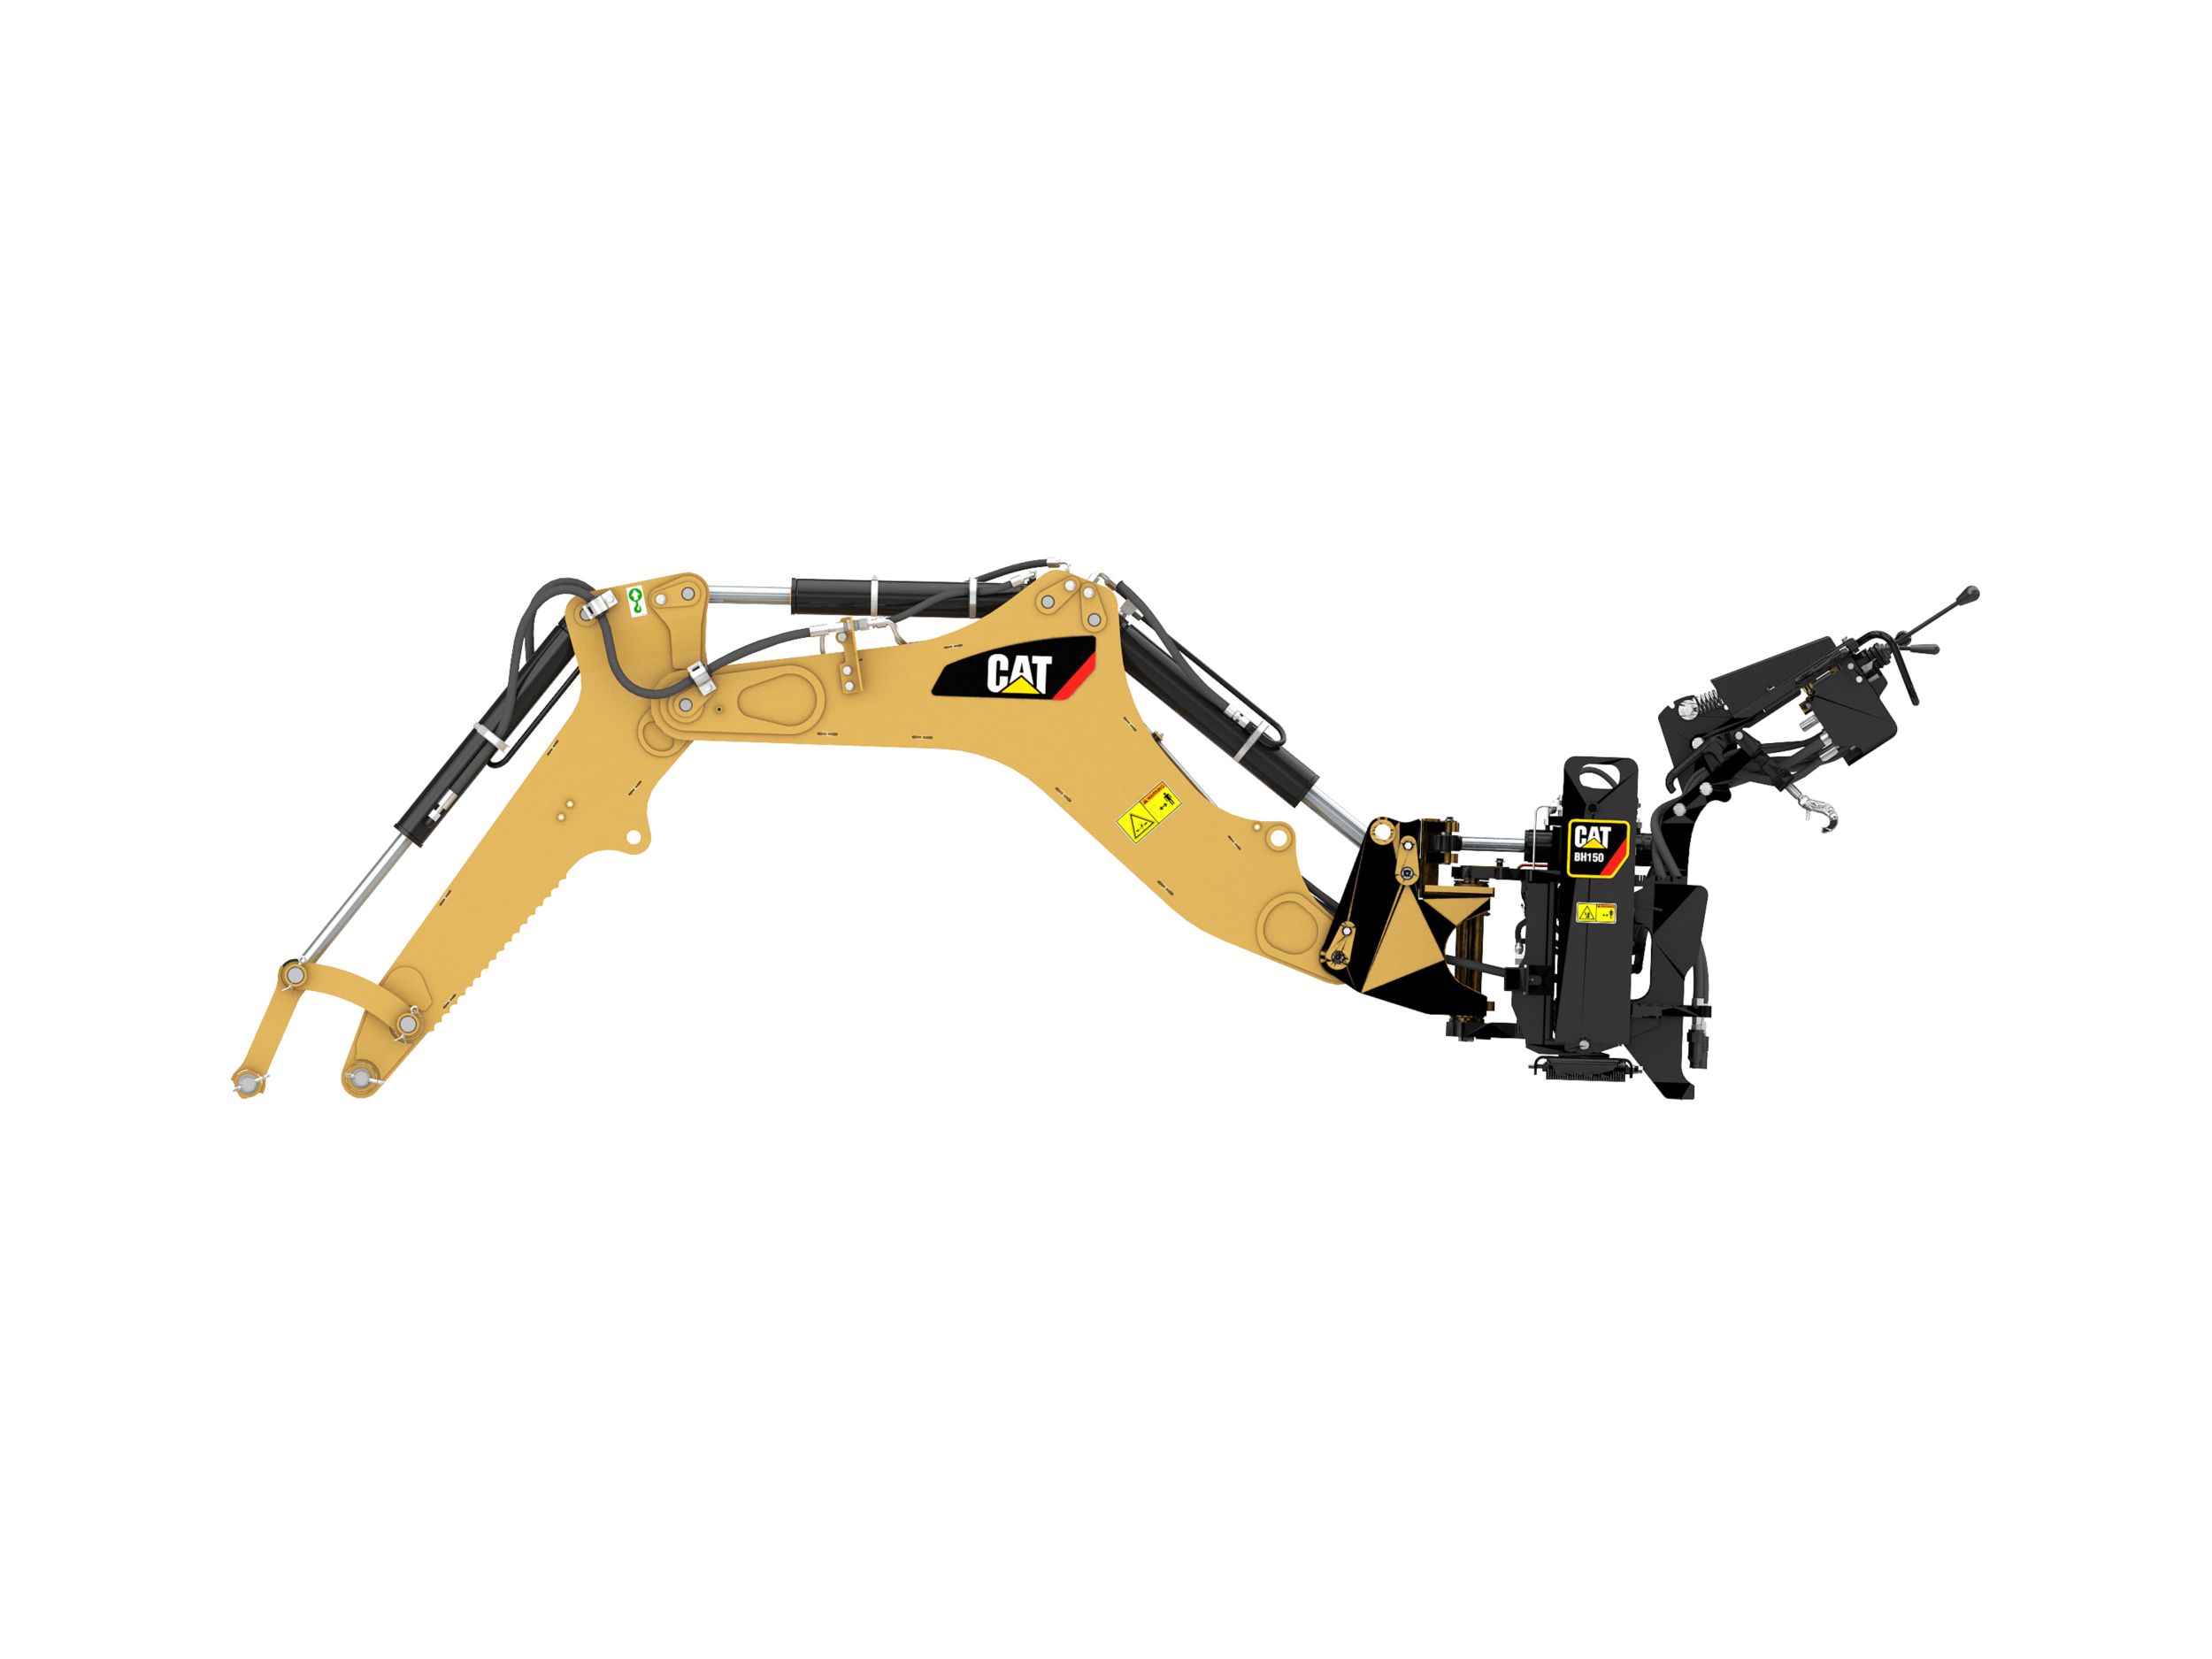 BH150 backhoes